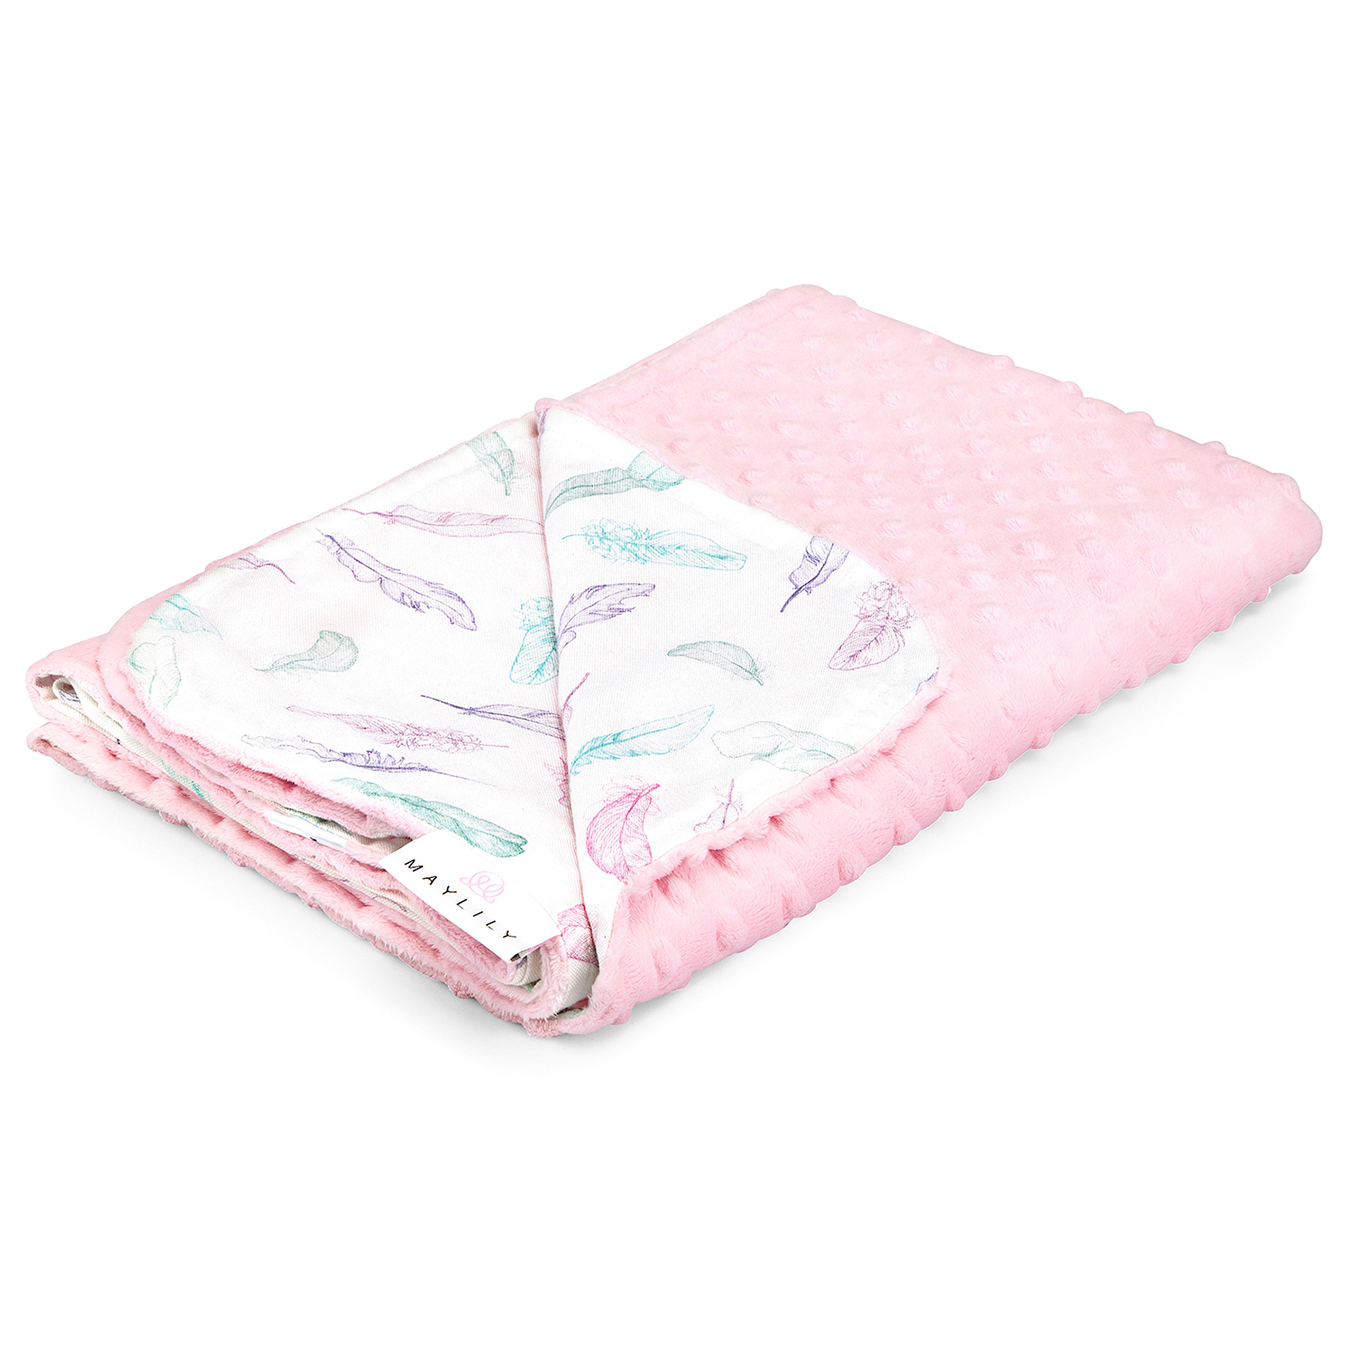 Light bamboo blanket - Paradise feathers - dusty pink